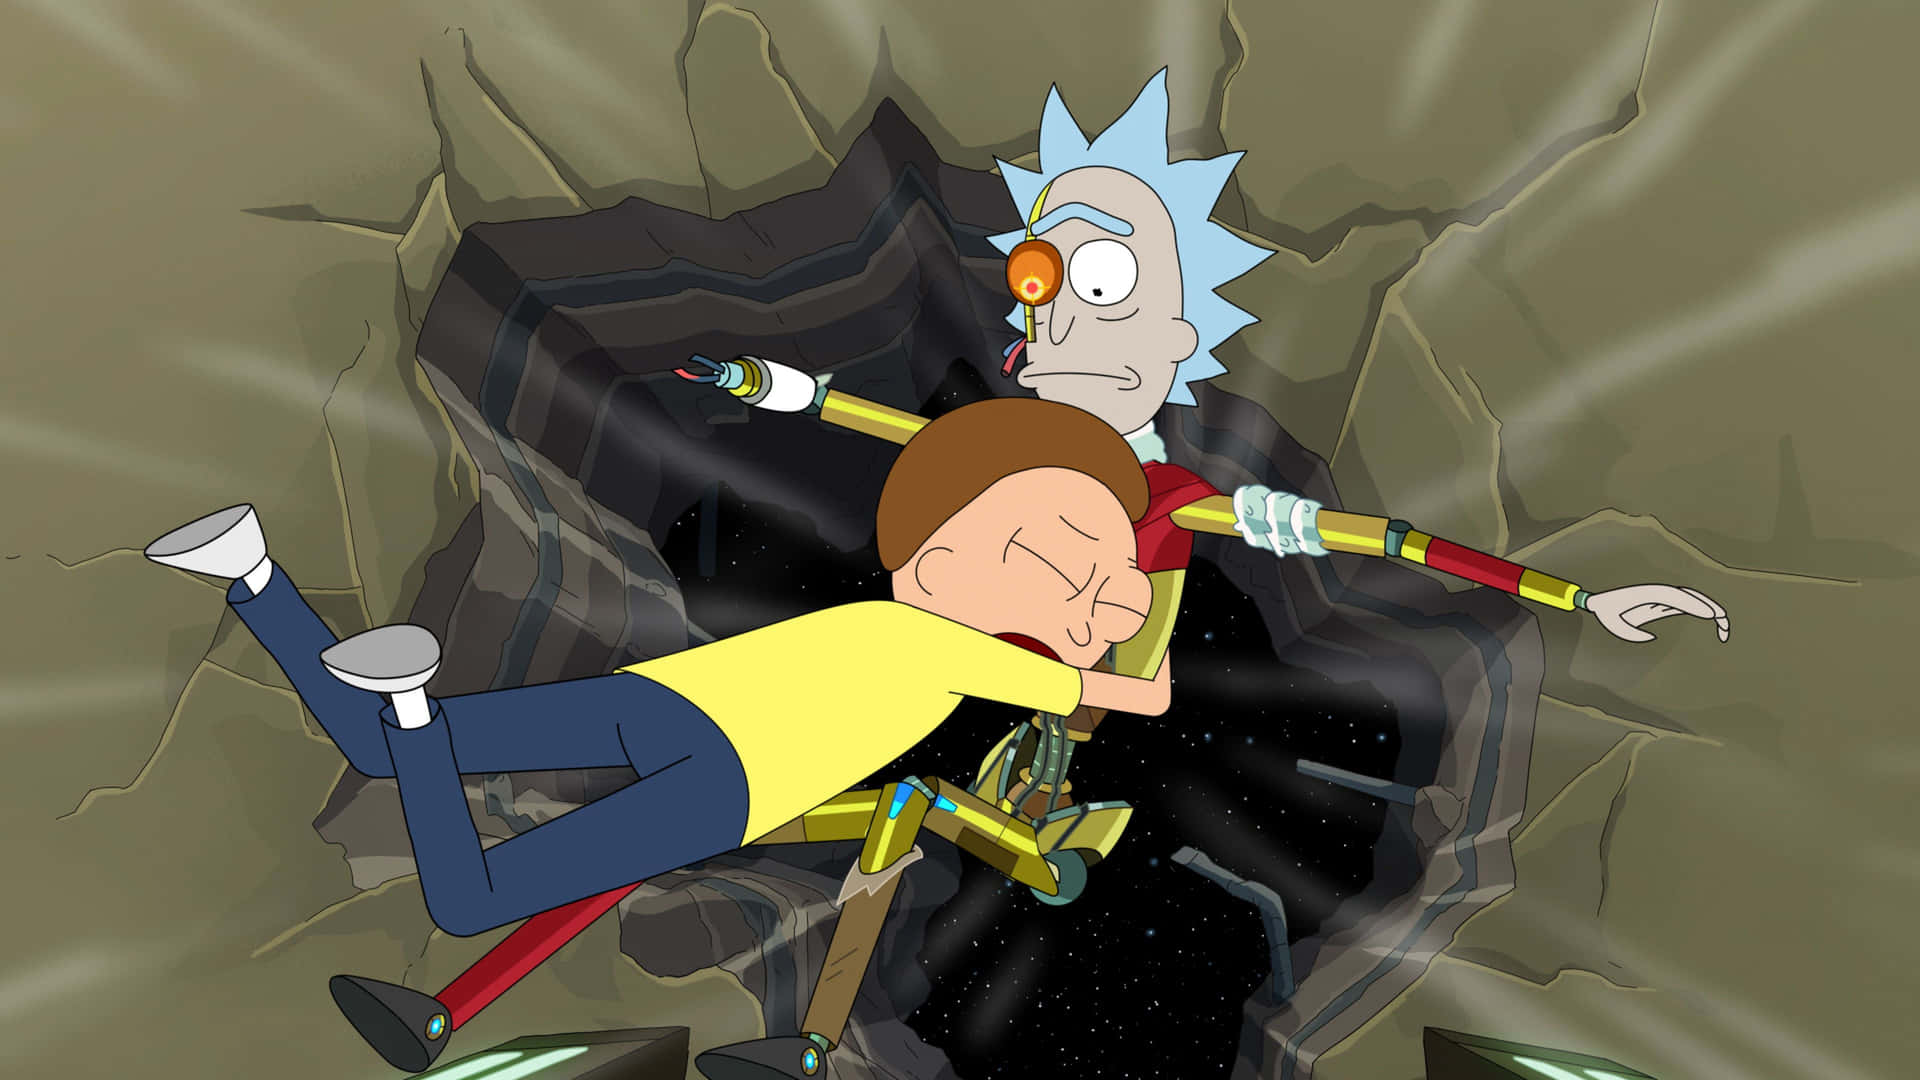 Crazy adventures with Rick and Morty